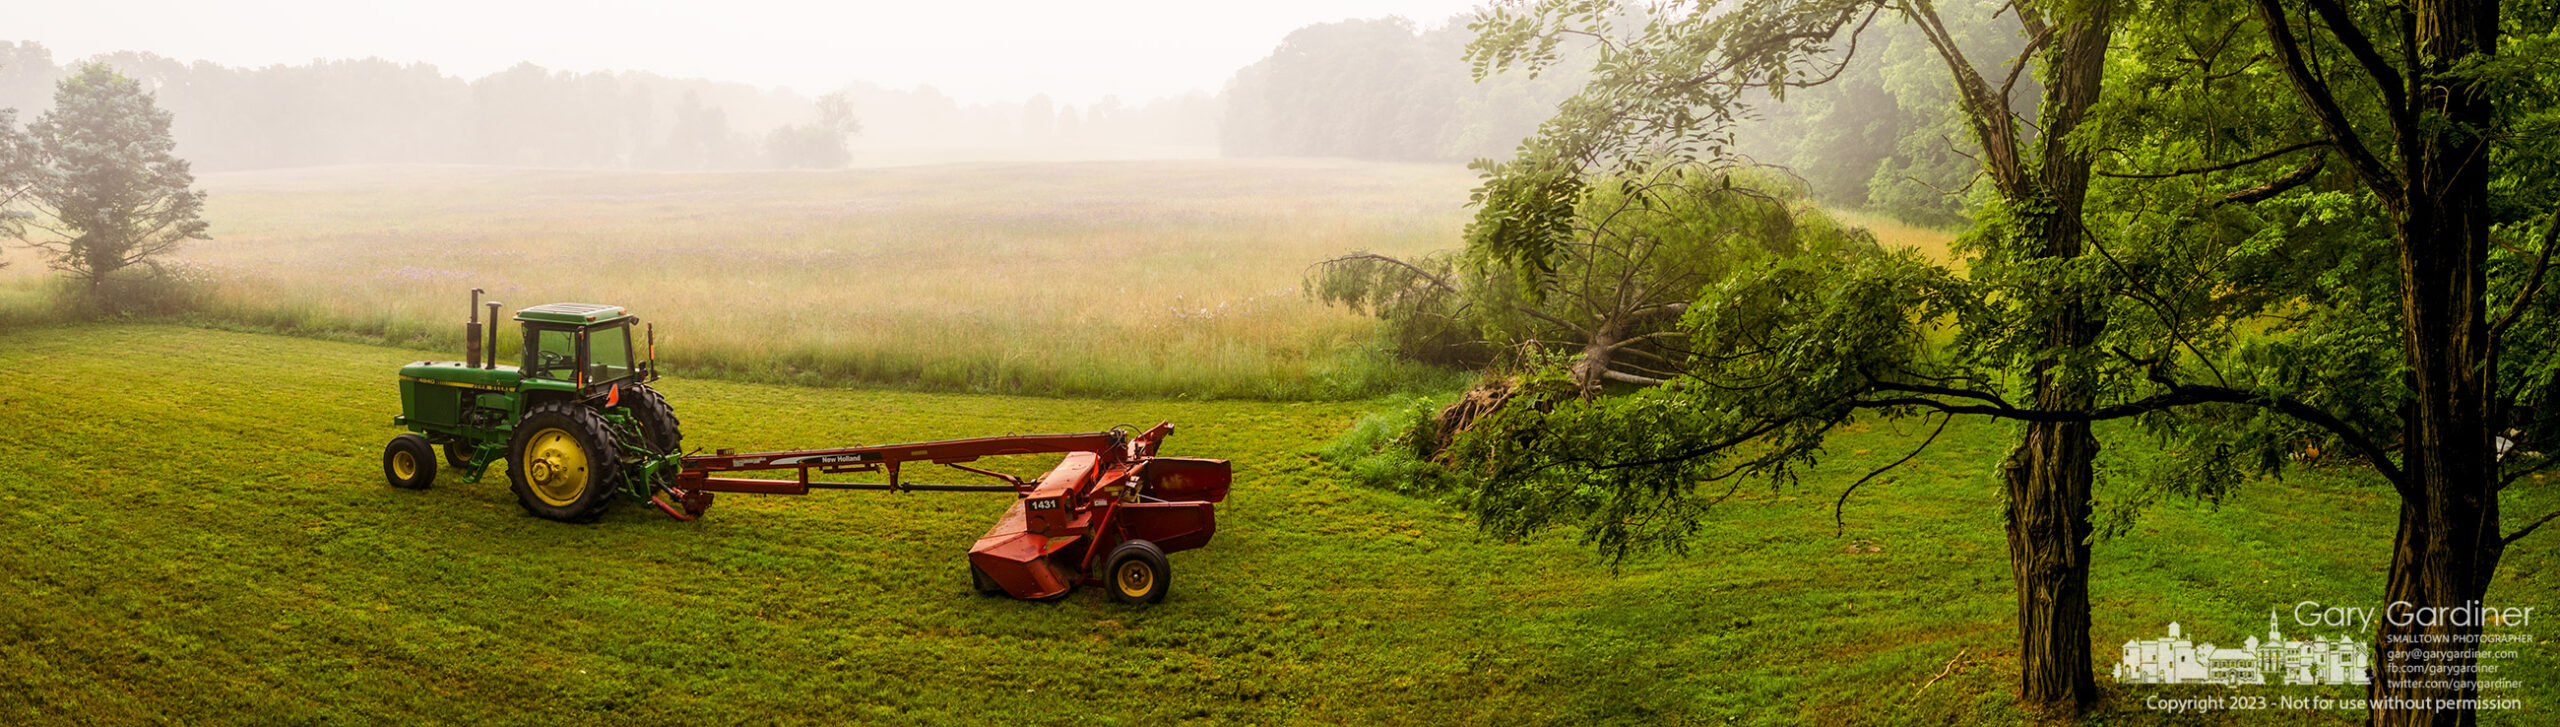 Morning haze and fog obscures the hay field at the Sharp Farm where the farmer has placed his tractor to begin cutting hay later in the day. My Final Photo for June 28, 2023.